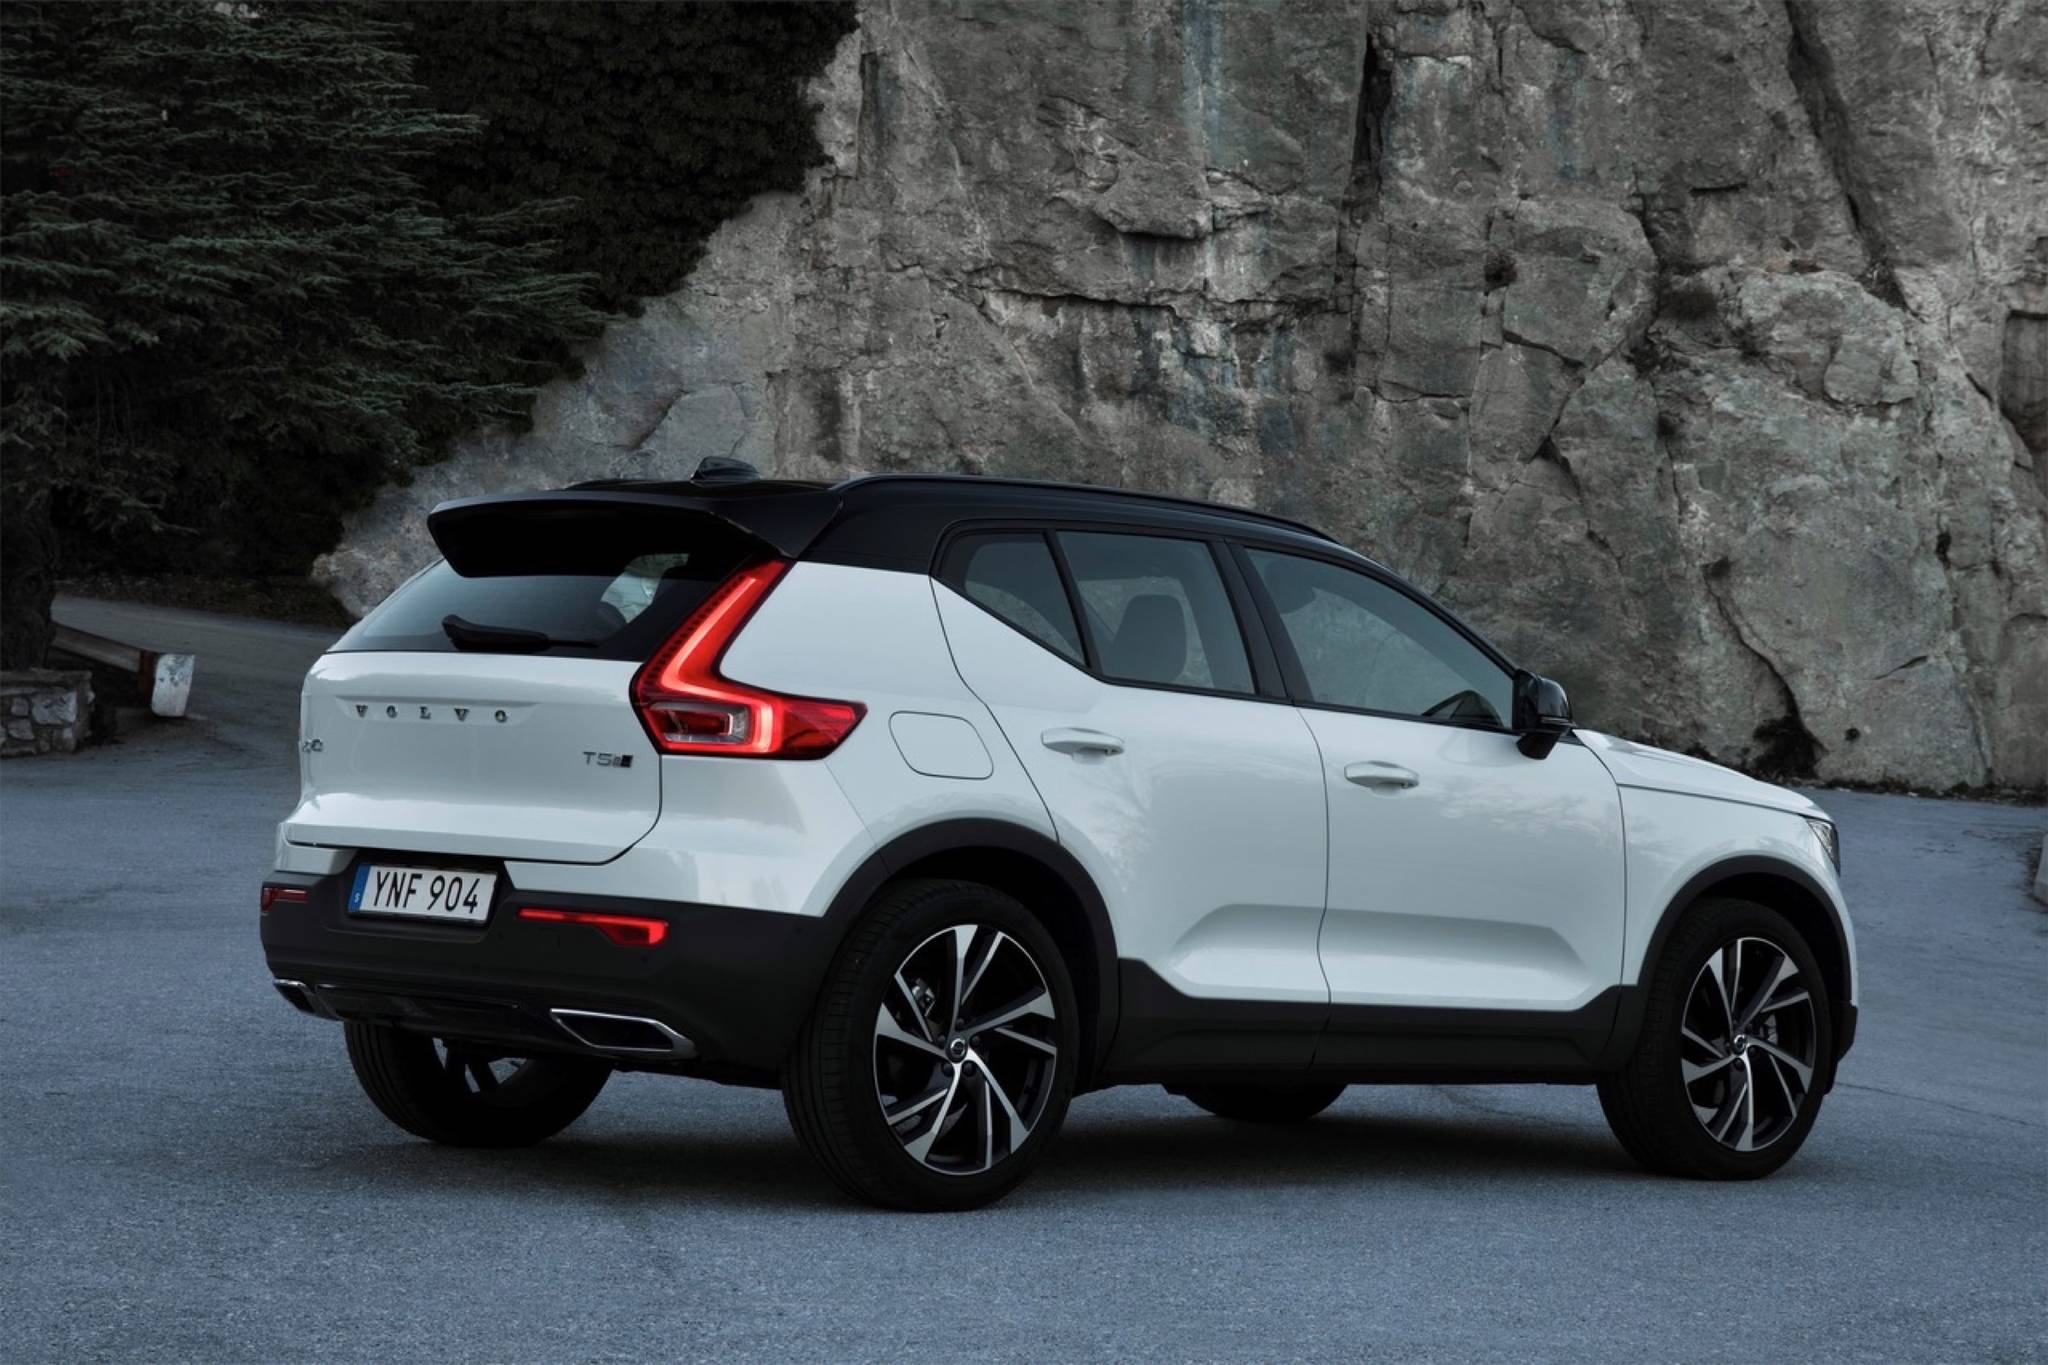 2020 Volvo XC40 brings a new level of refinement - Bella Coola News